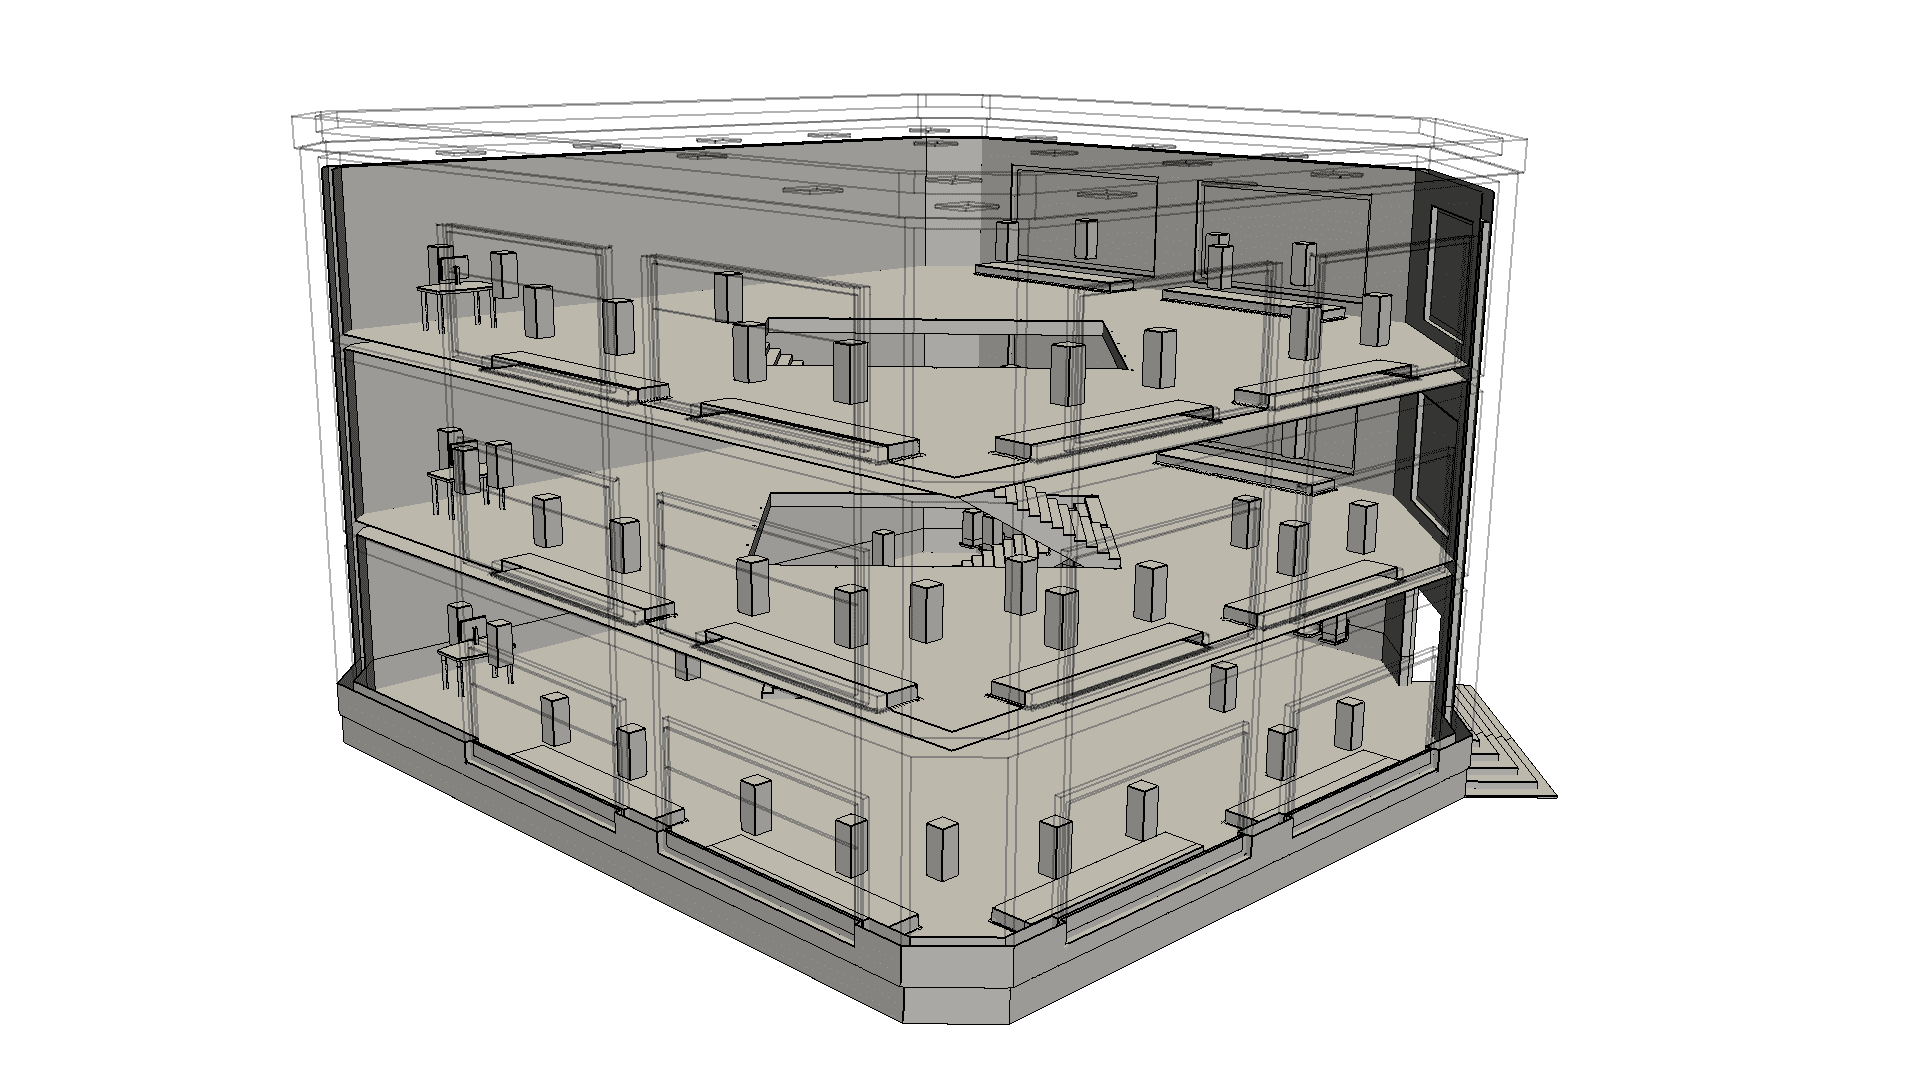 Shopping mall CAD model, commercial building design